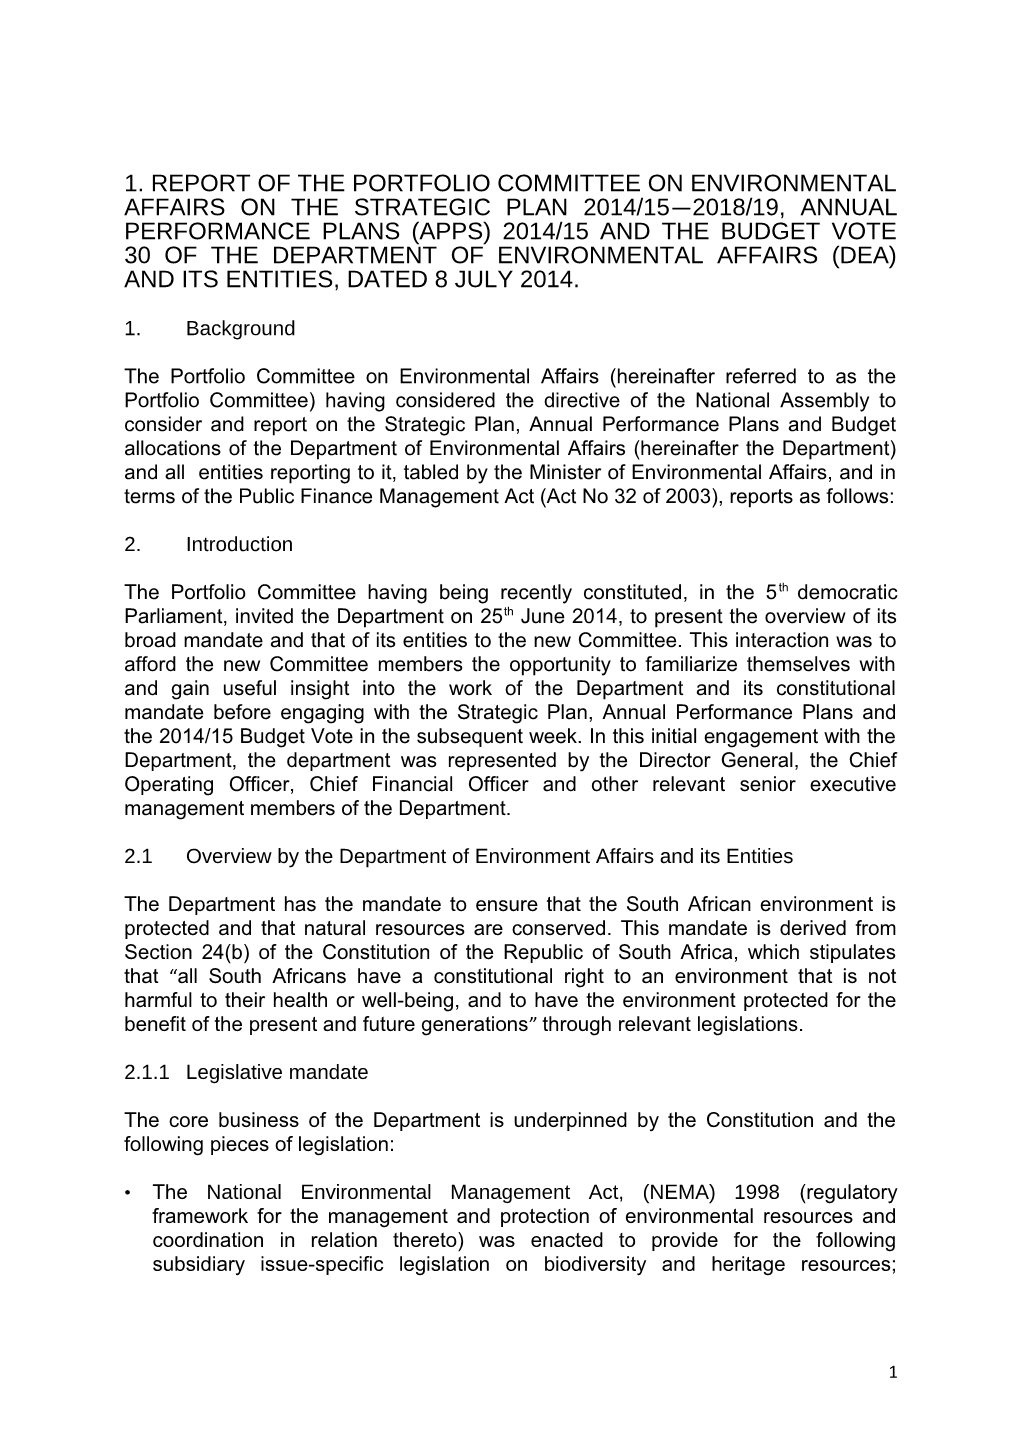 2.1Overview by the Department of Environment Affairs and Its Entities